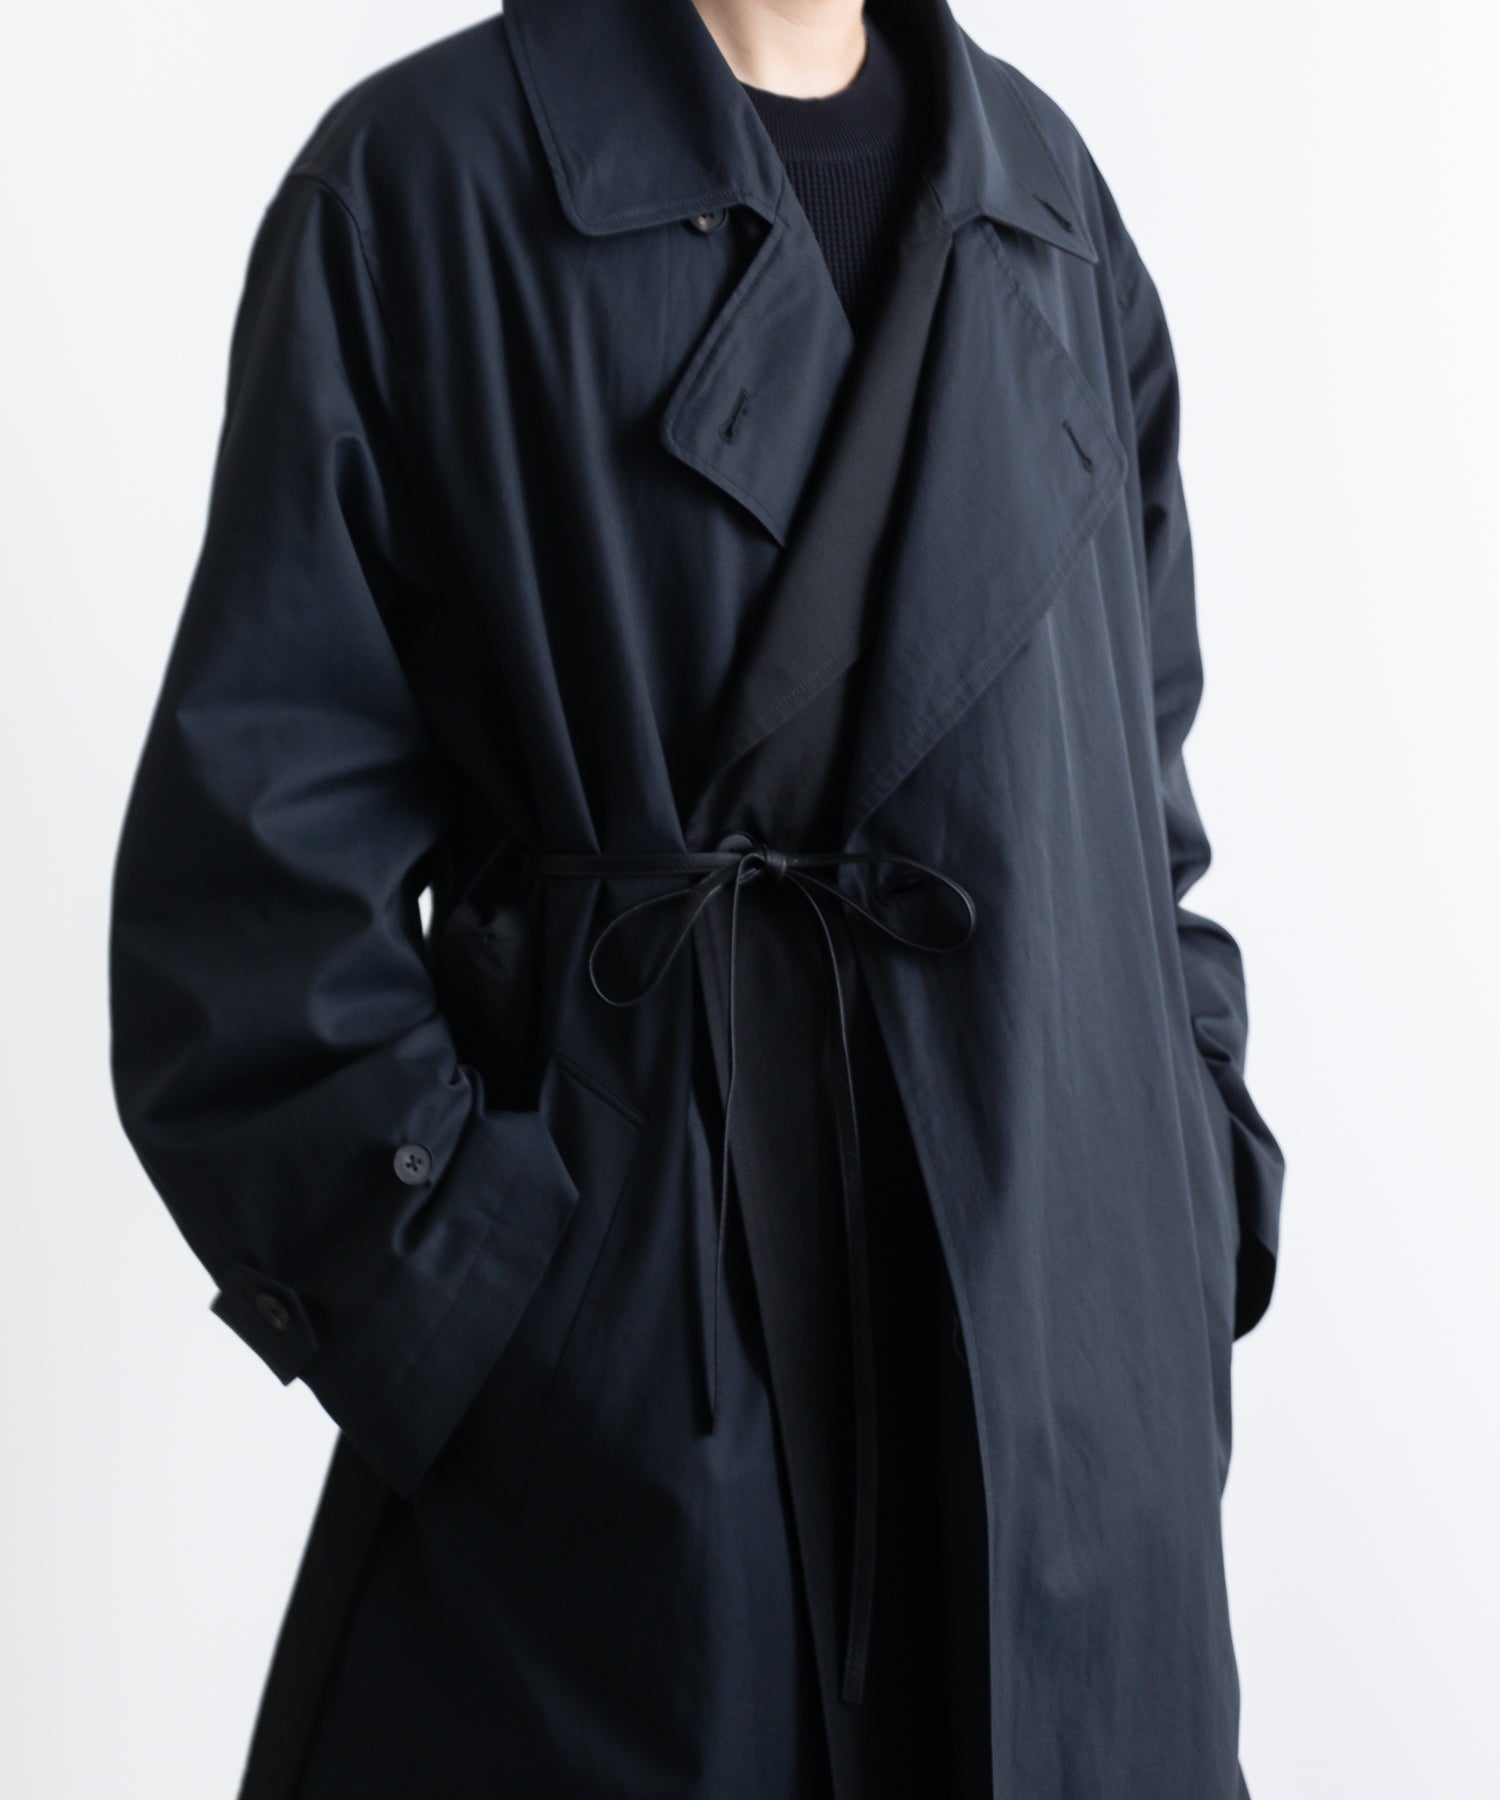 【stein】DOUBLE LAPELED DOUBLE BREASTED COAT - DARK NAVY